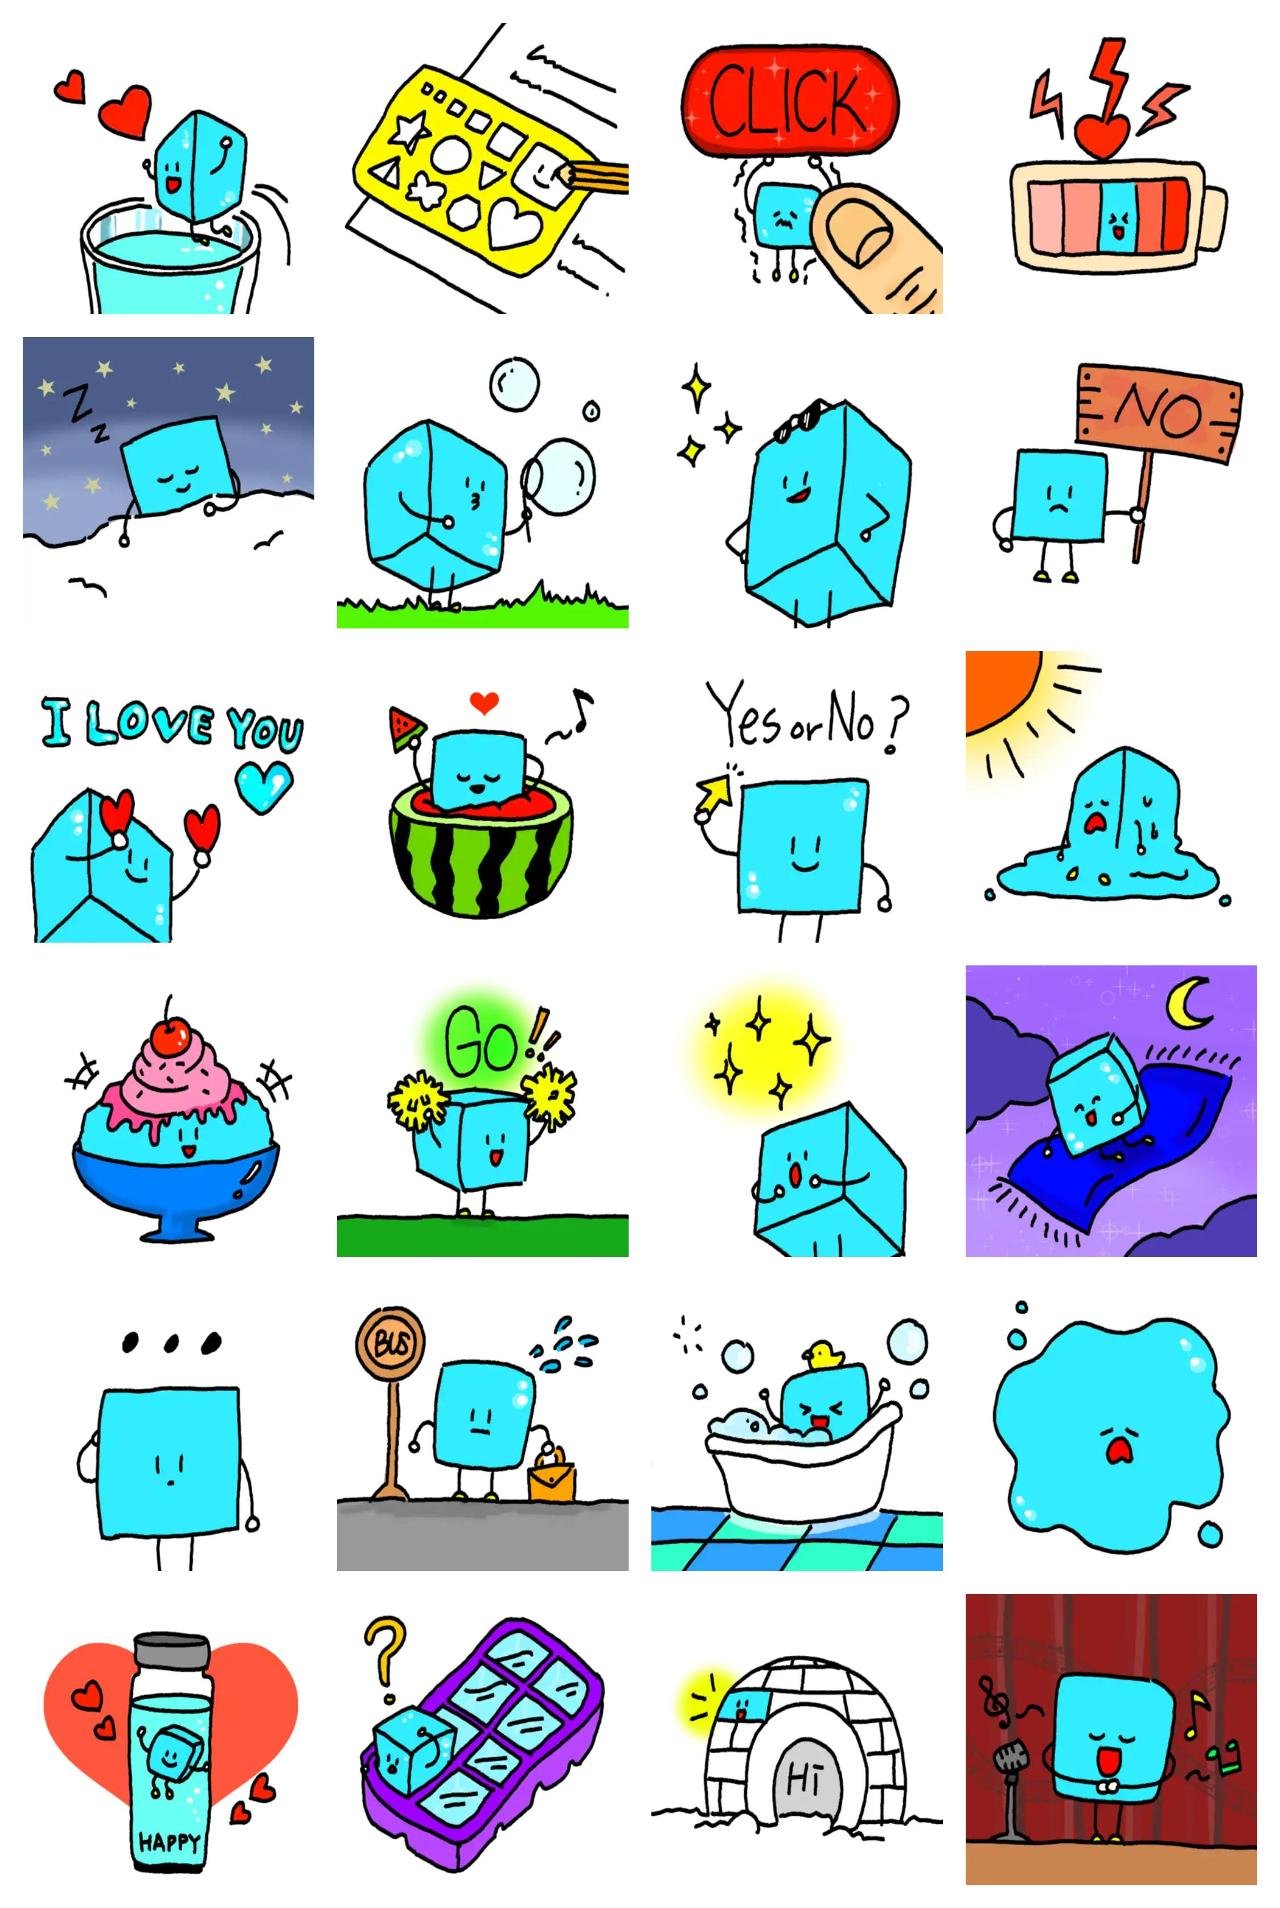 Cute ice Etc. sticker pack for Whatsapp, Telegram, Signal, and others chatting and message apps